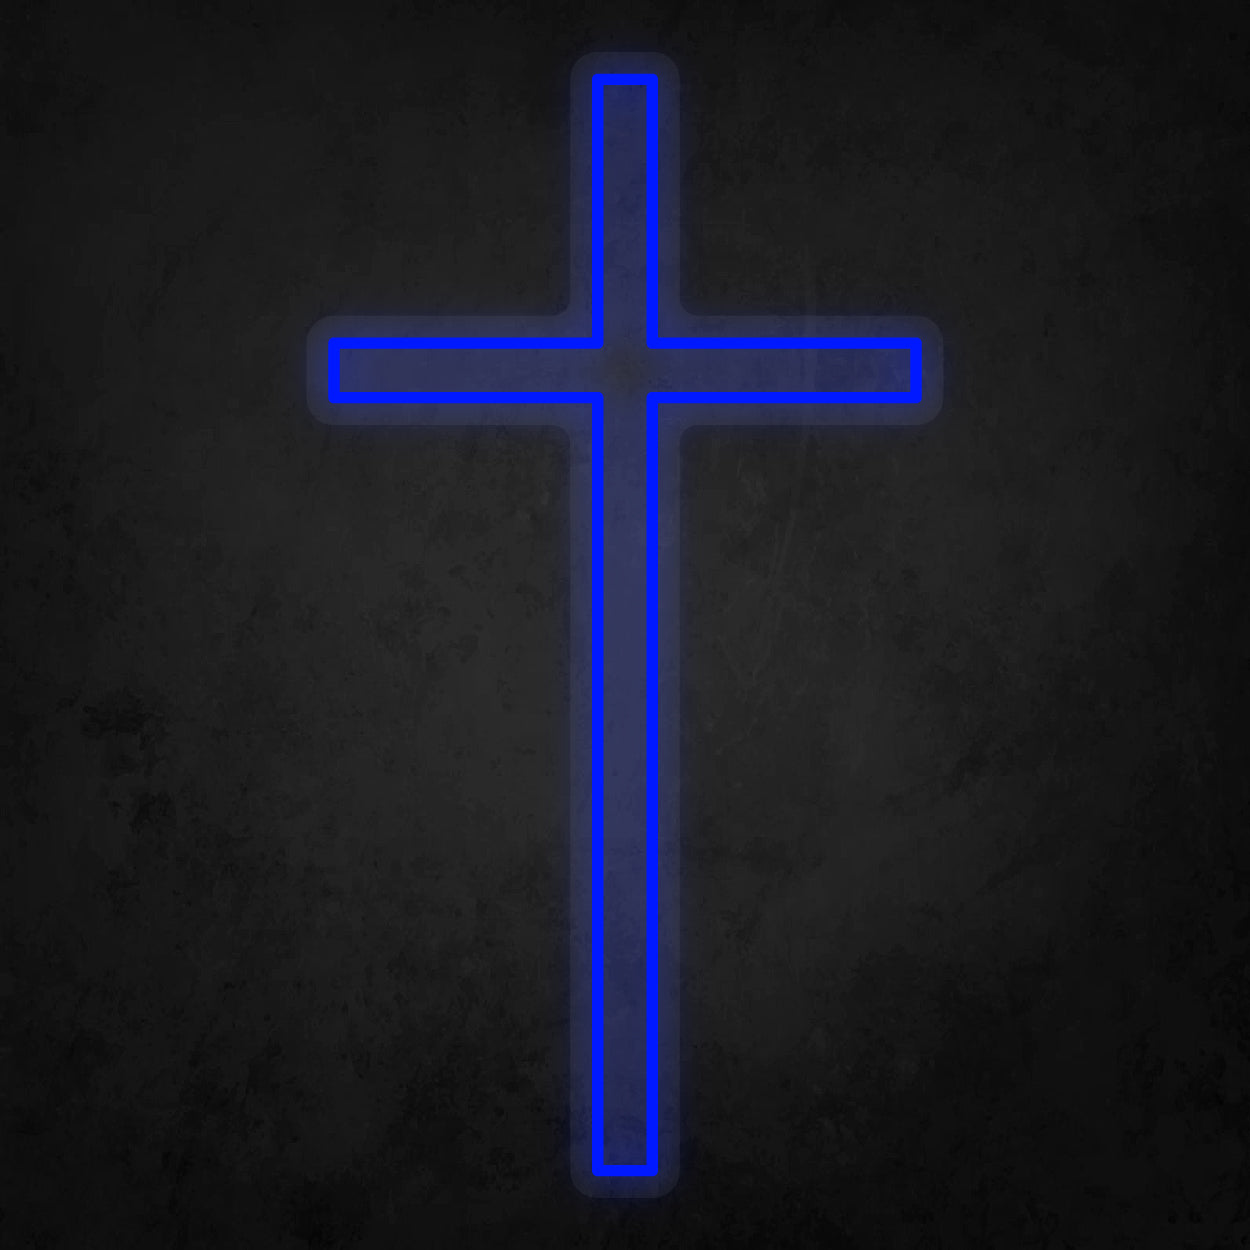 LED Neon Sign - The Cross Large 2 Line